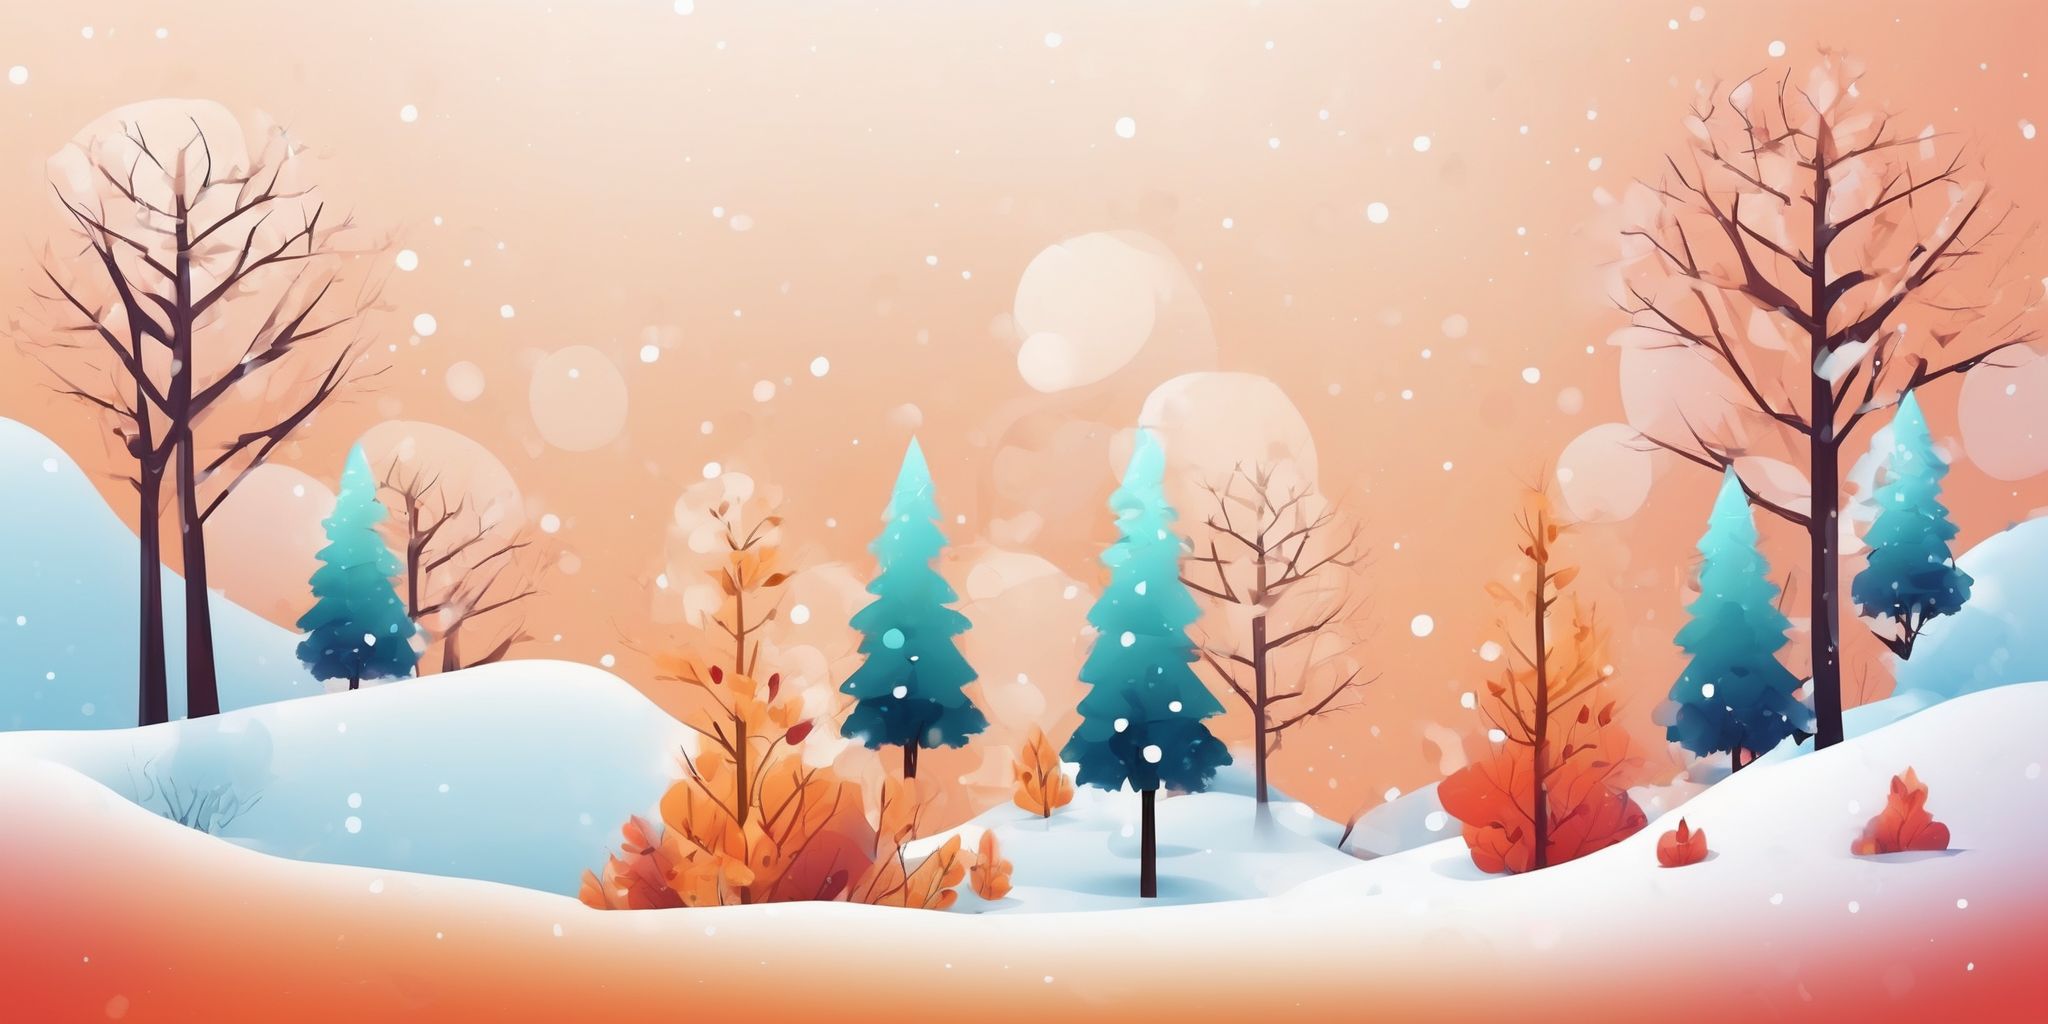 Seasonal promotion in illustration style with gradients and white background